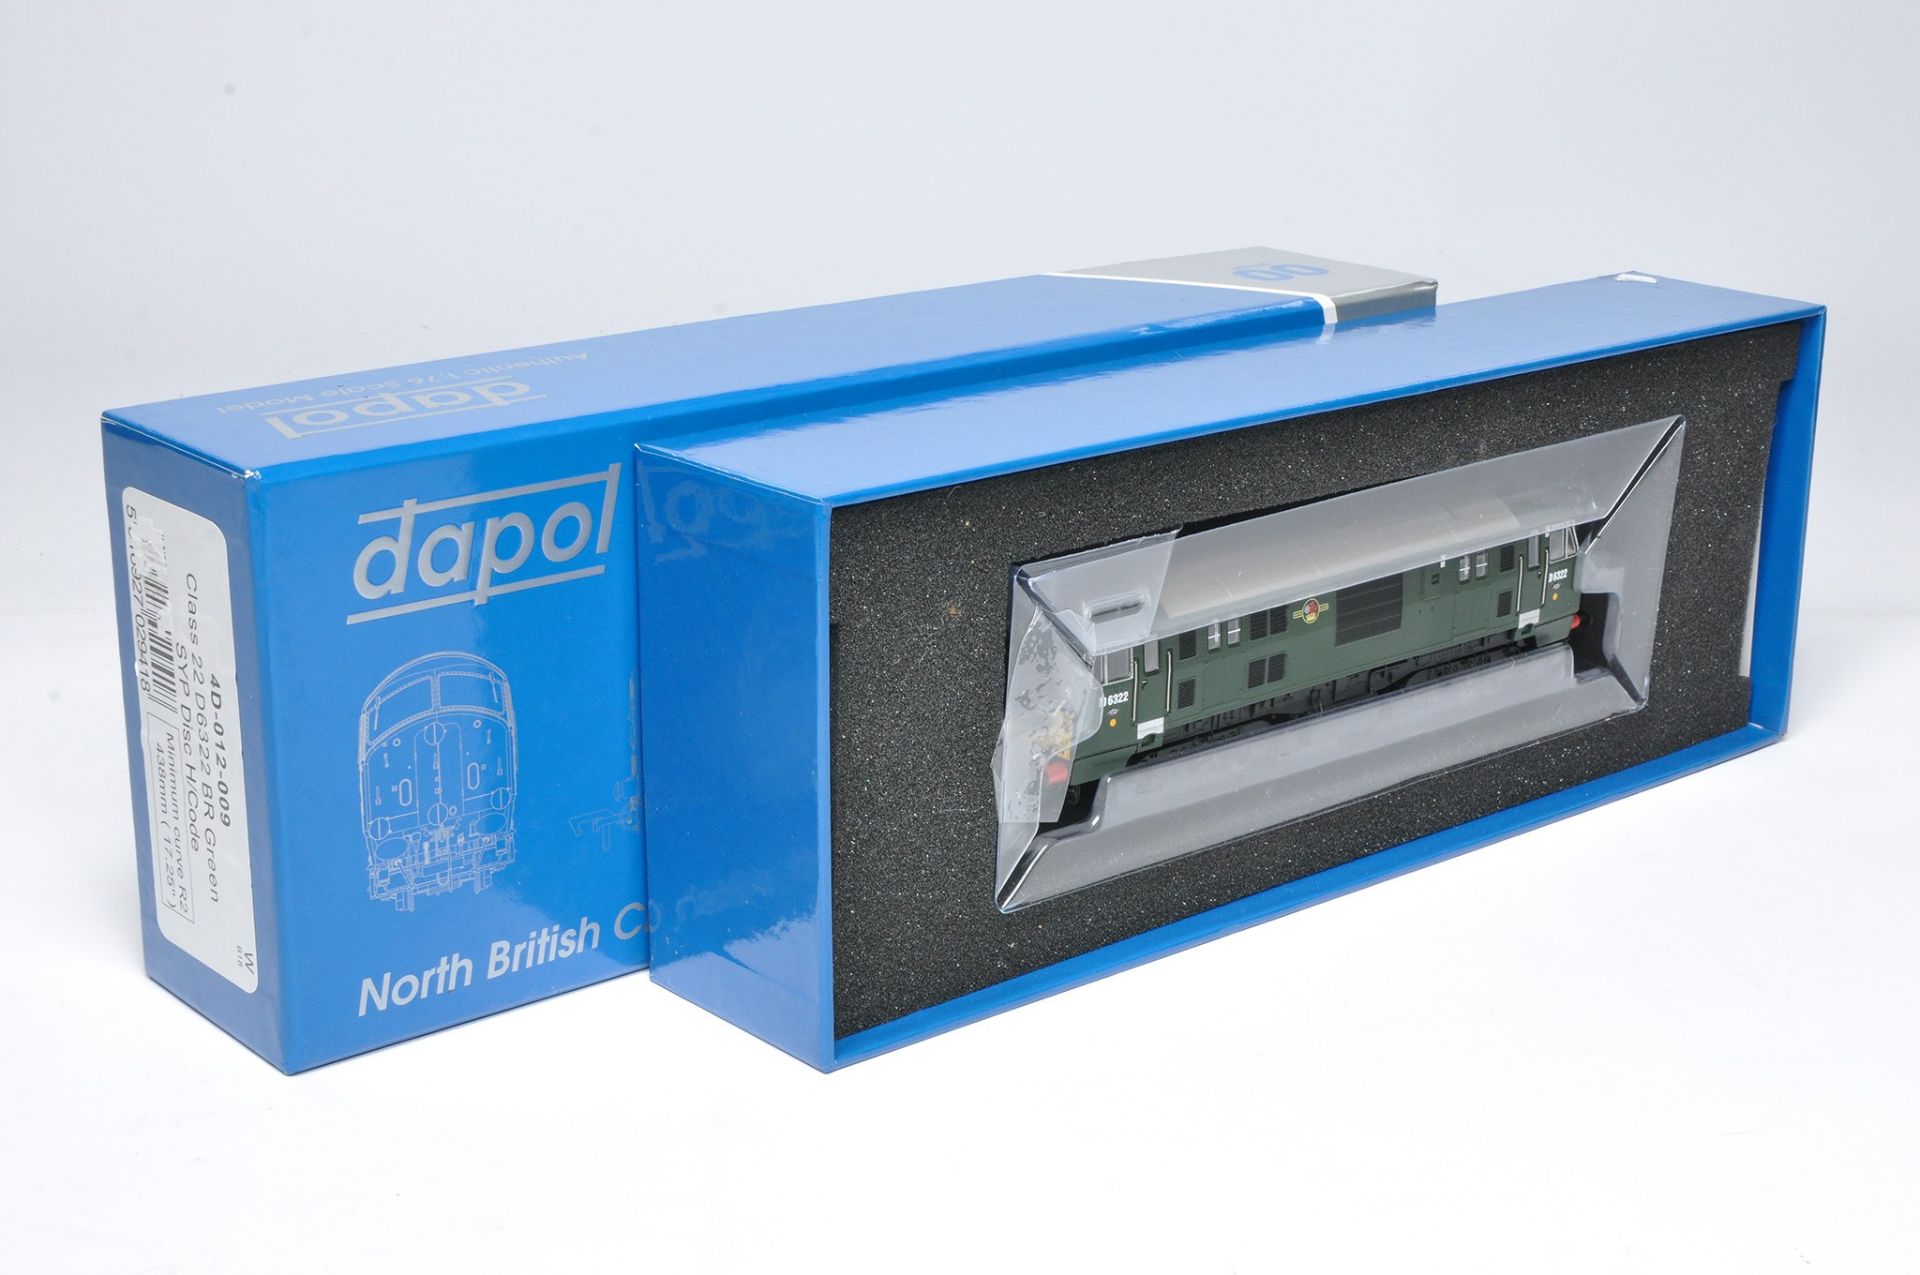 Dapol Model Railway comprising locomotive issue No. 4D-012-009 Class 22 D6322. Looks to be without